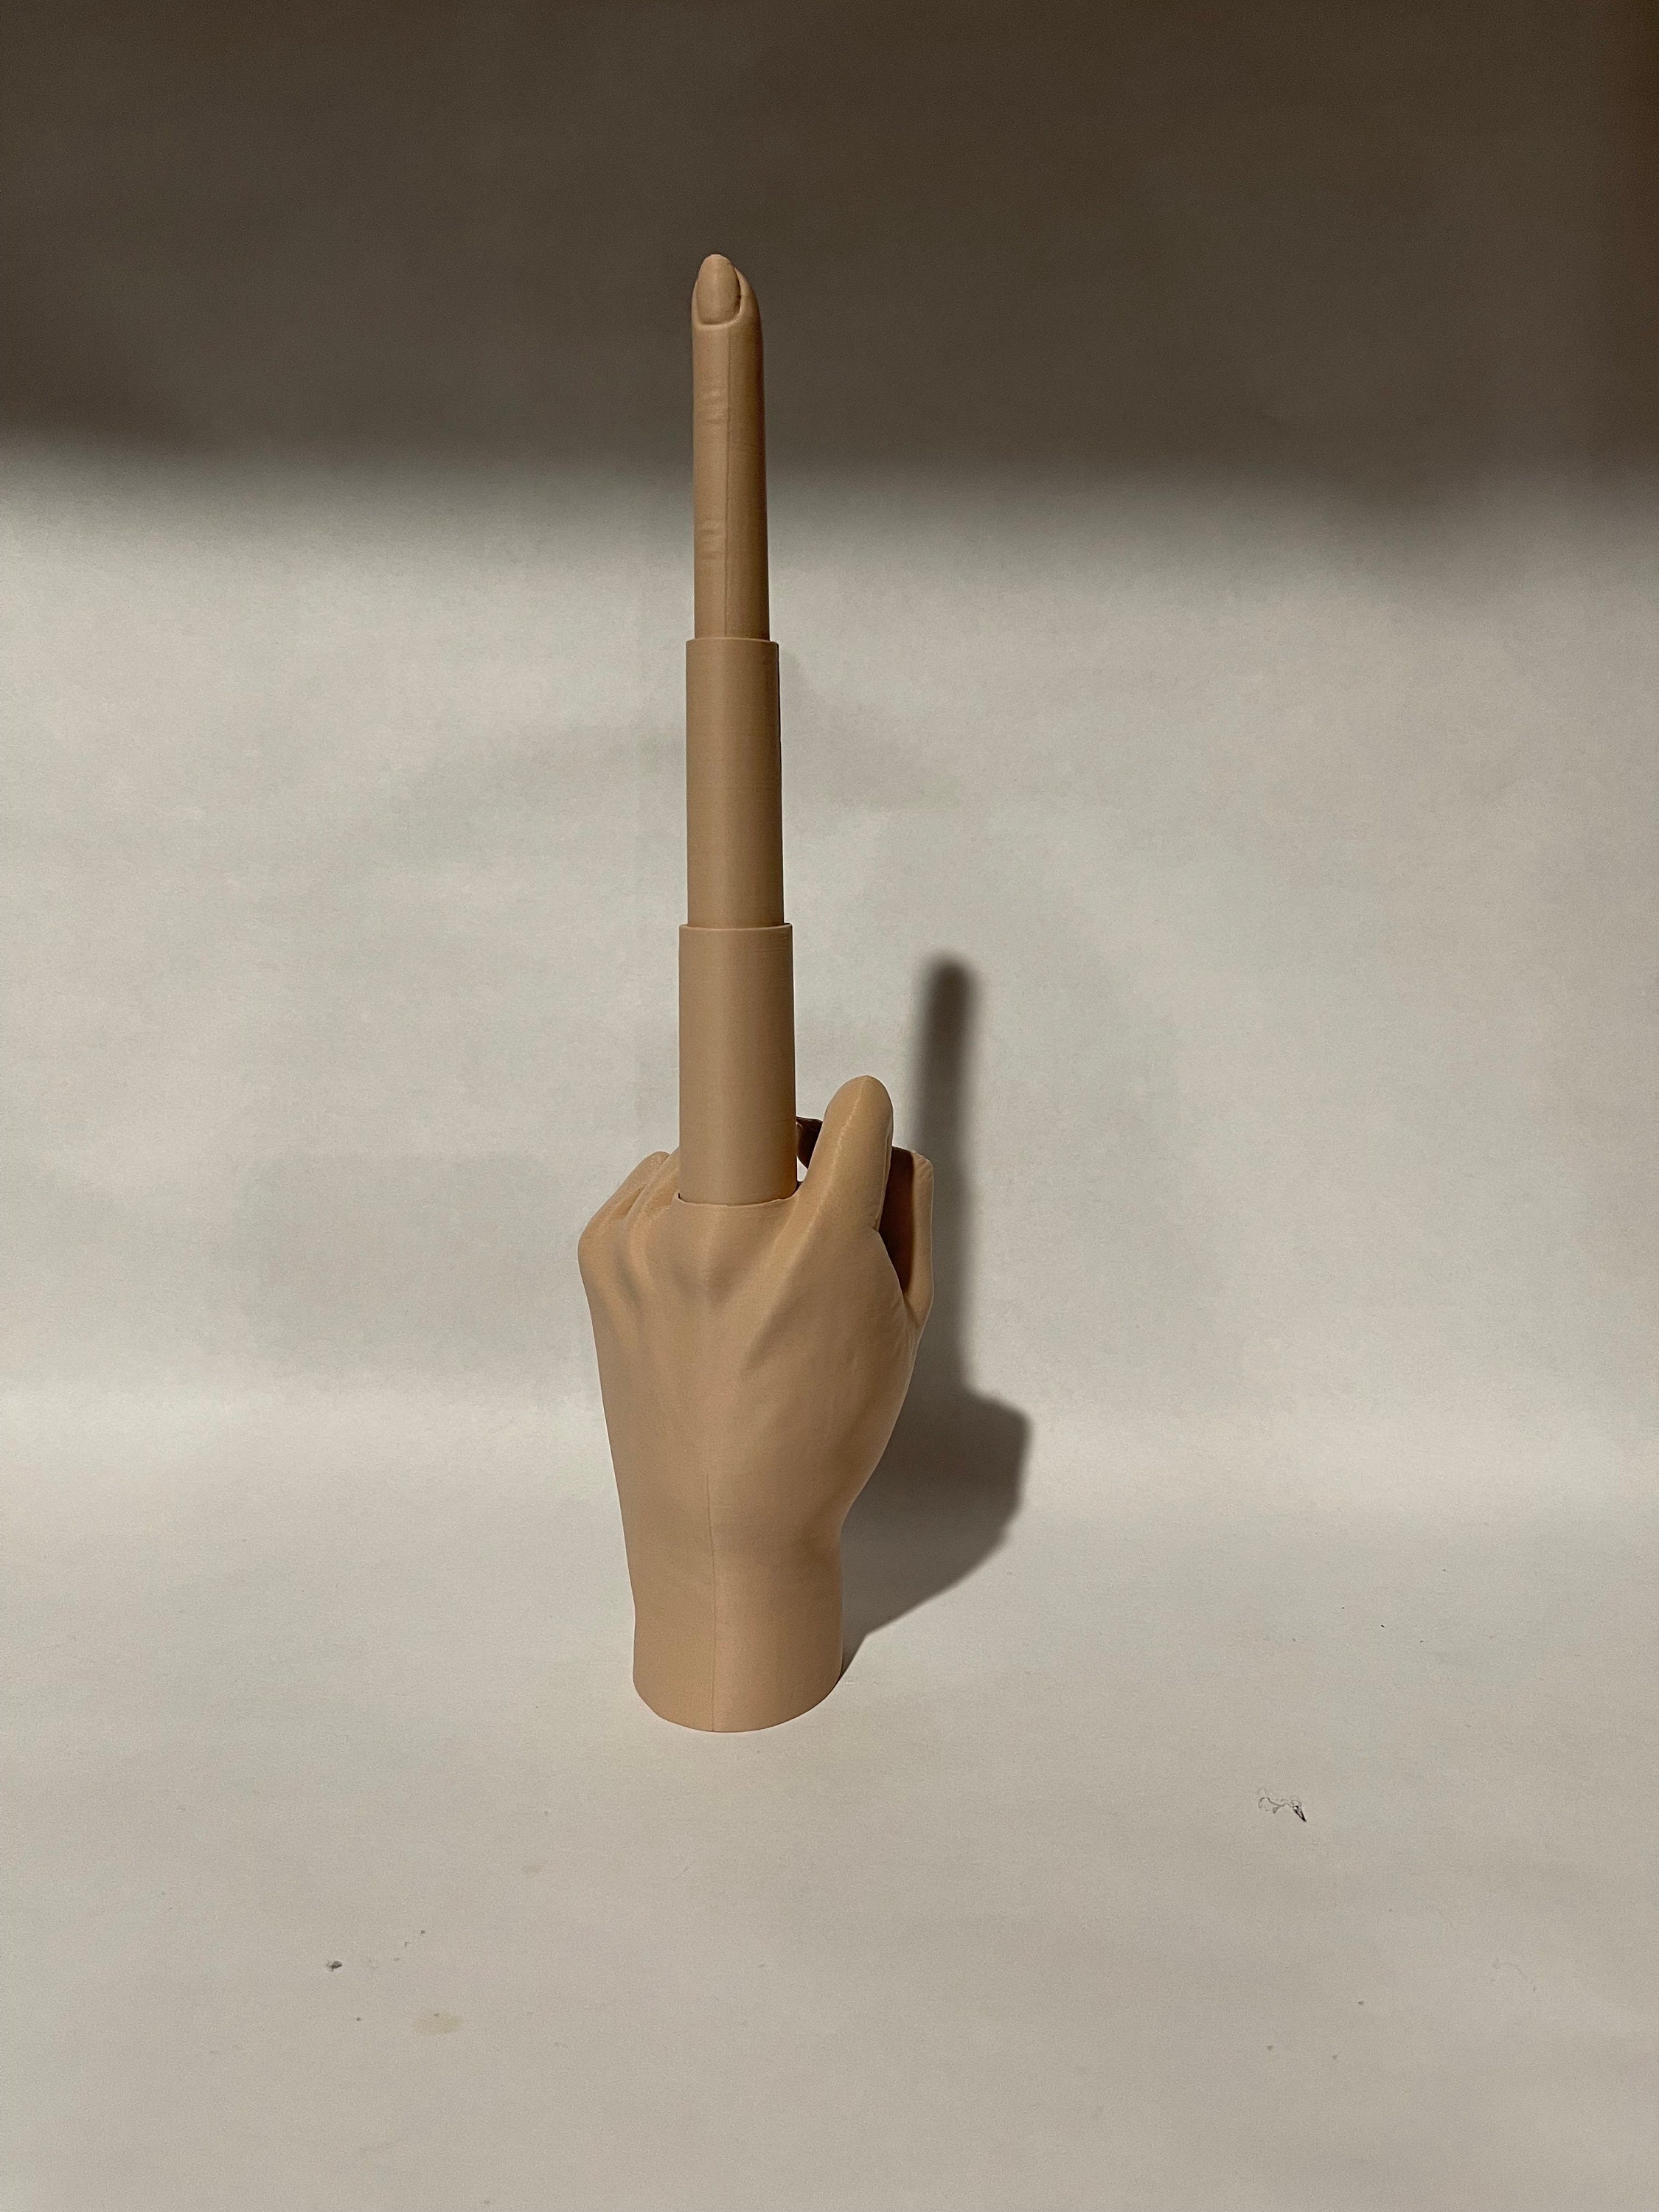 RMCTOYS 1 Middle Finger Statue Hand, Joke Gifts Funny Gag for Adults, Office Novelty Toys